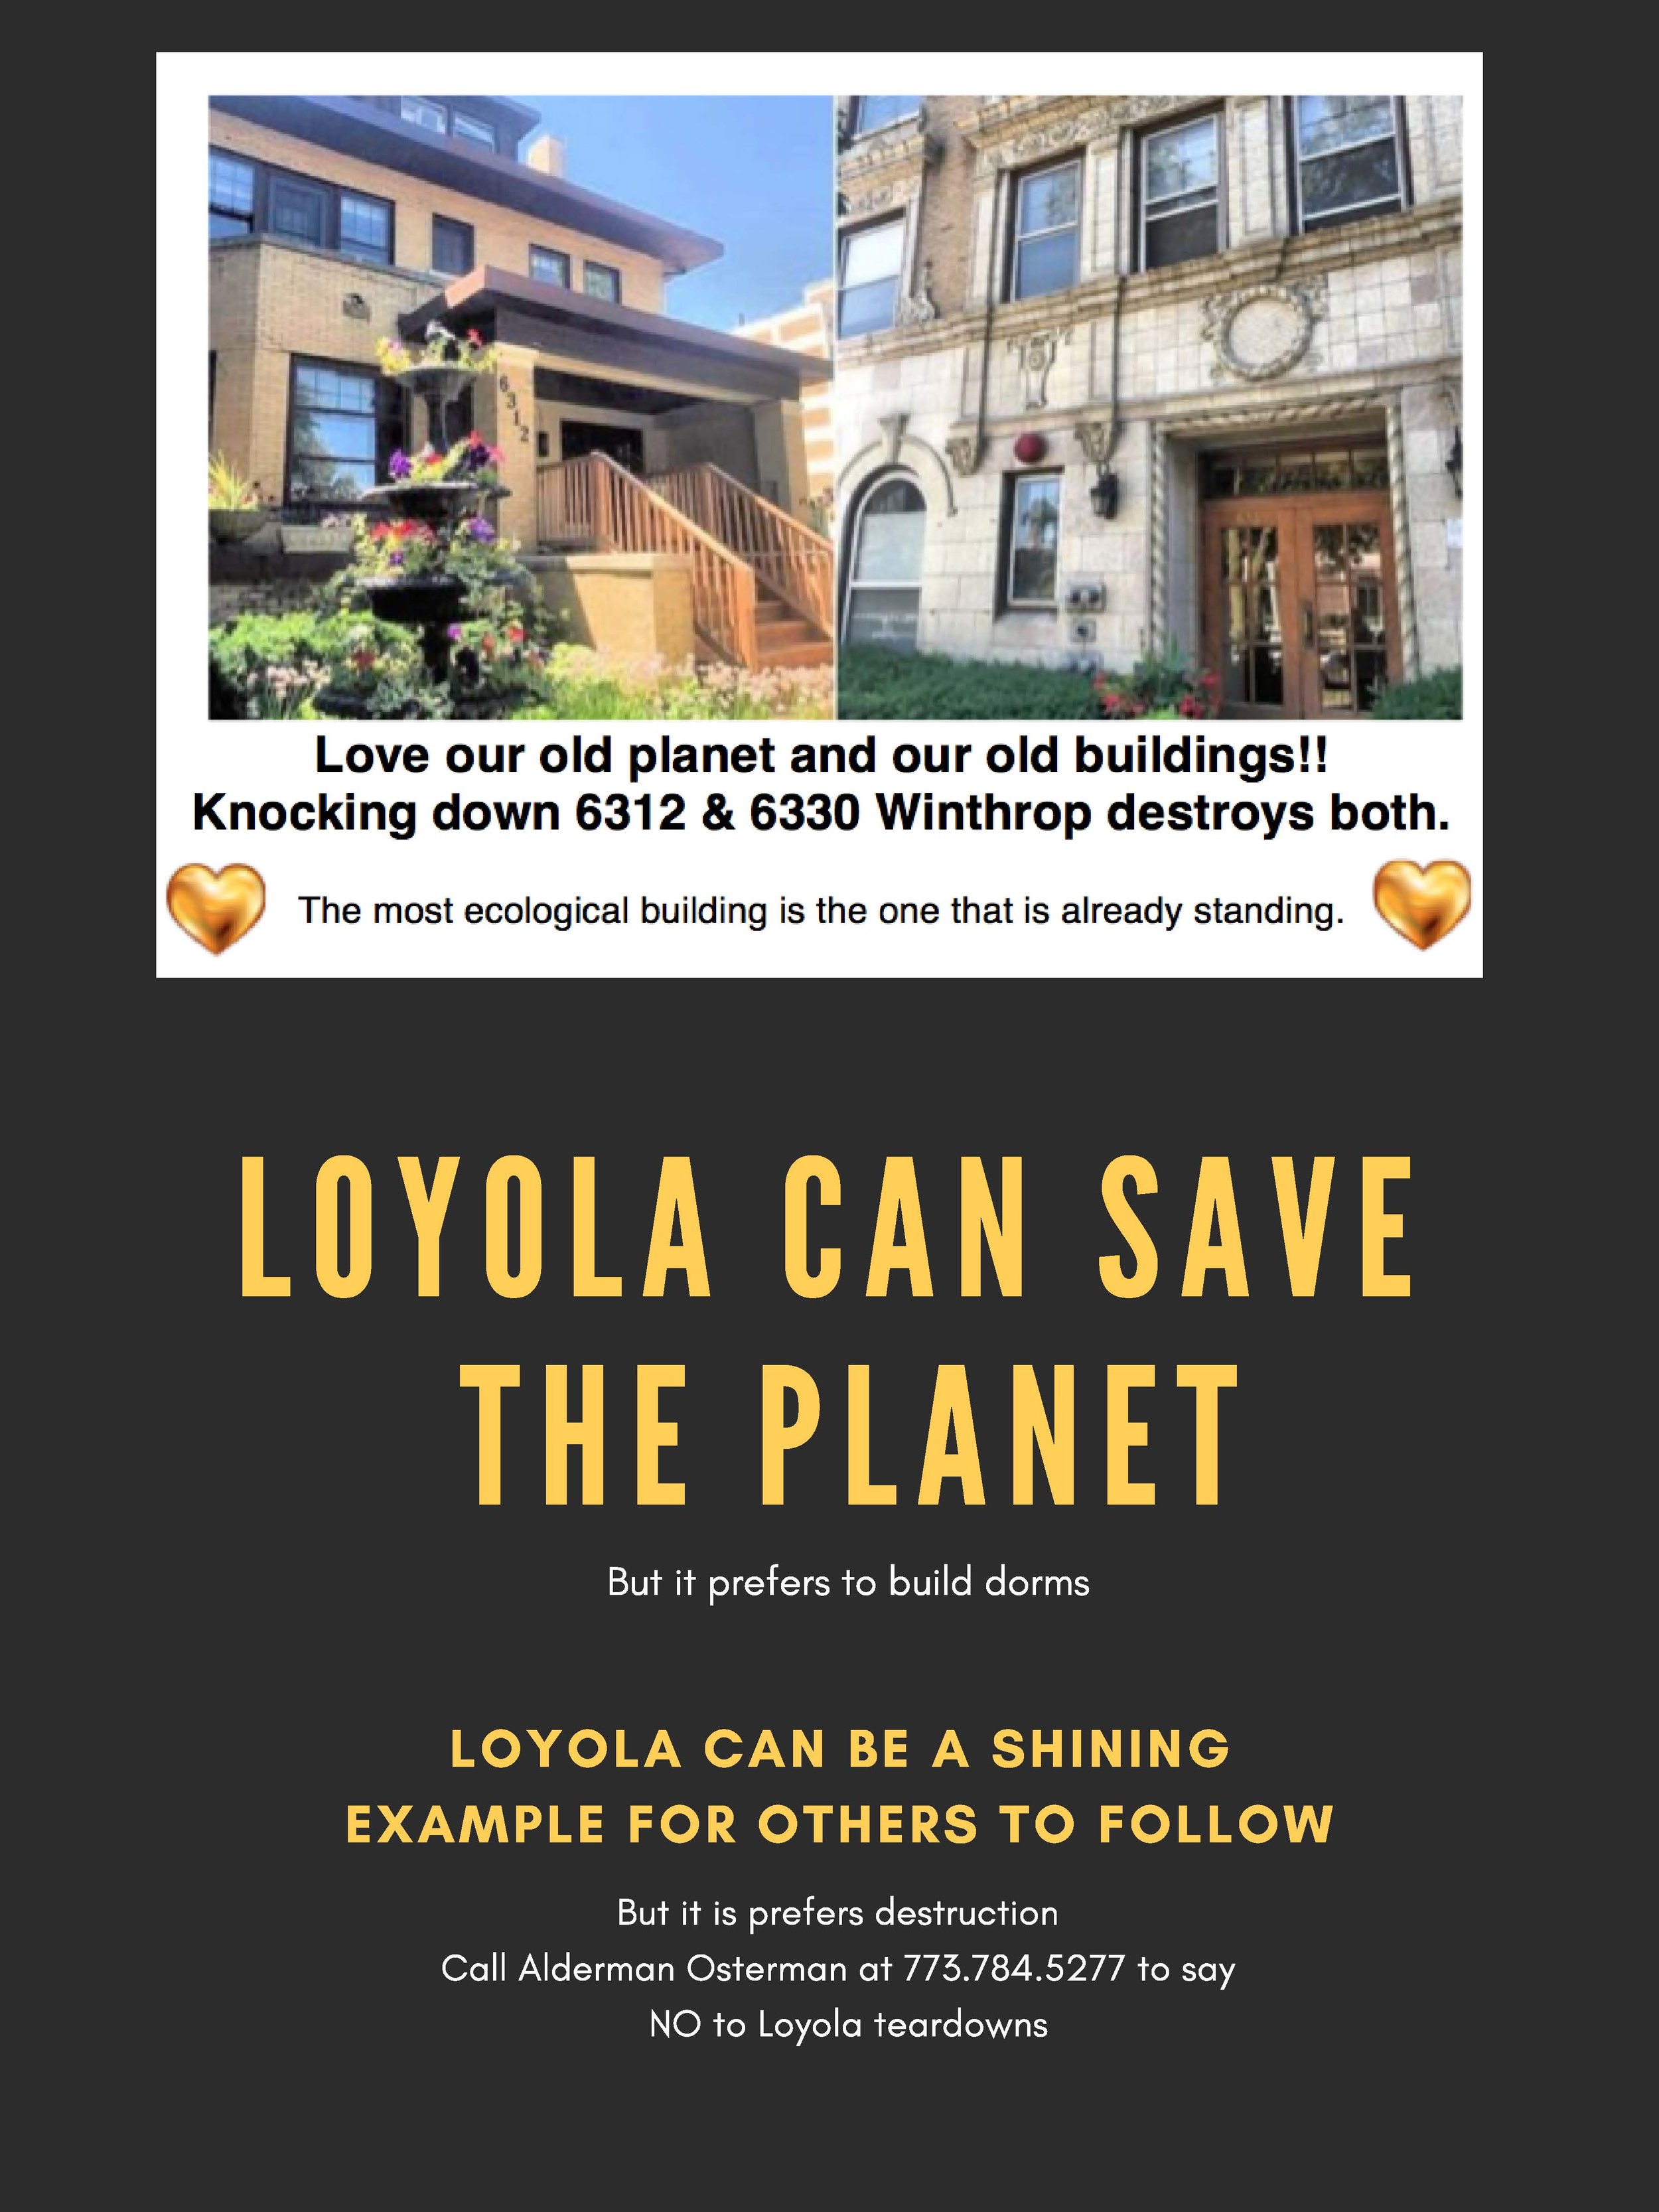 Loyola can save the planet-2.jpg